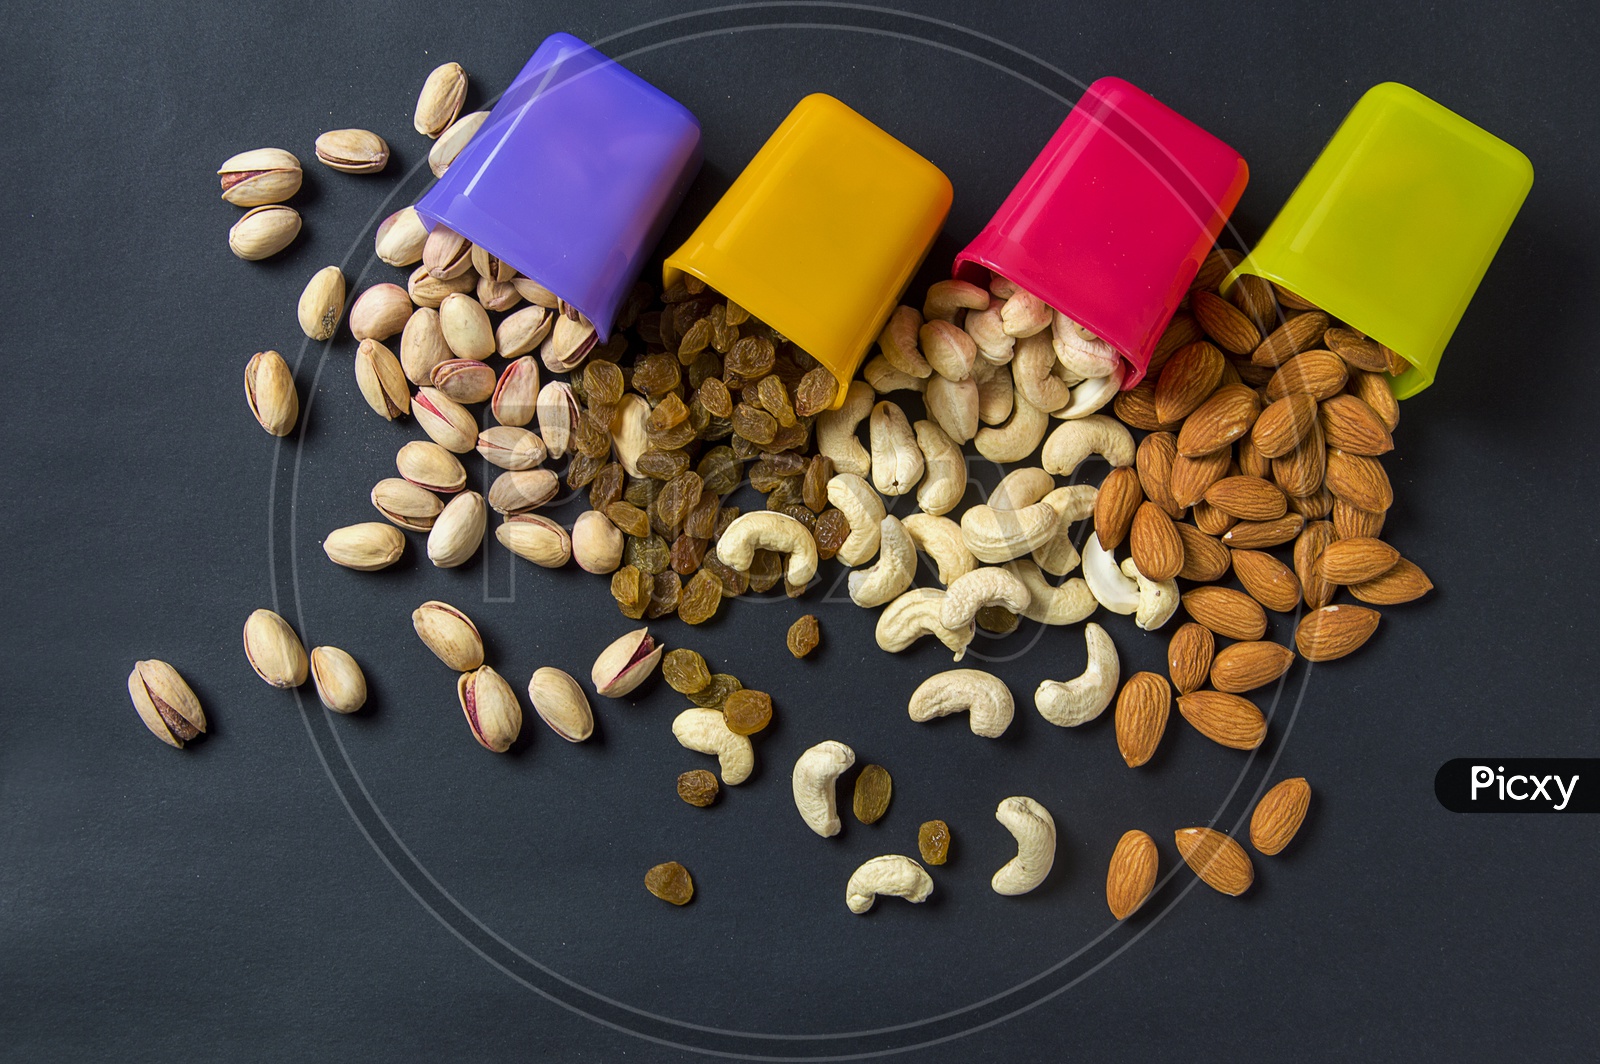 Healthy Mix Dry Fruits and Nuts on dark background